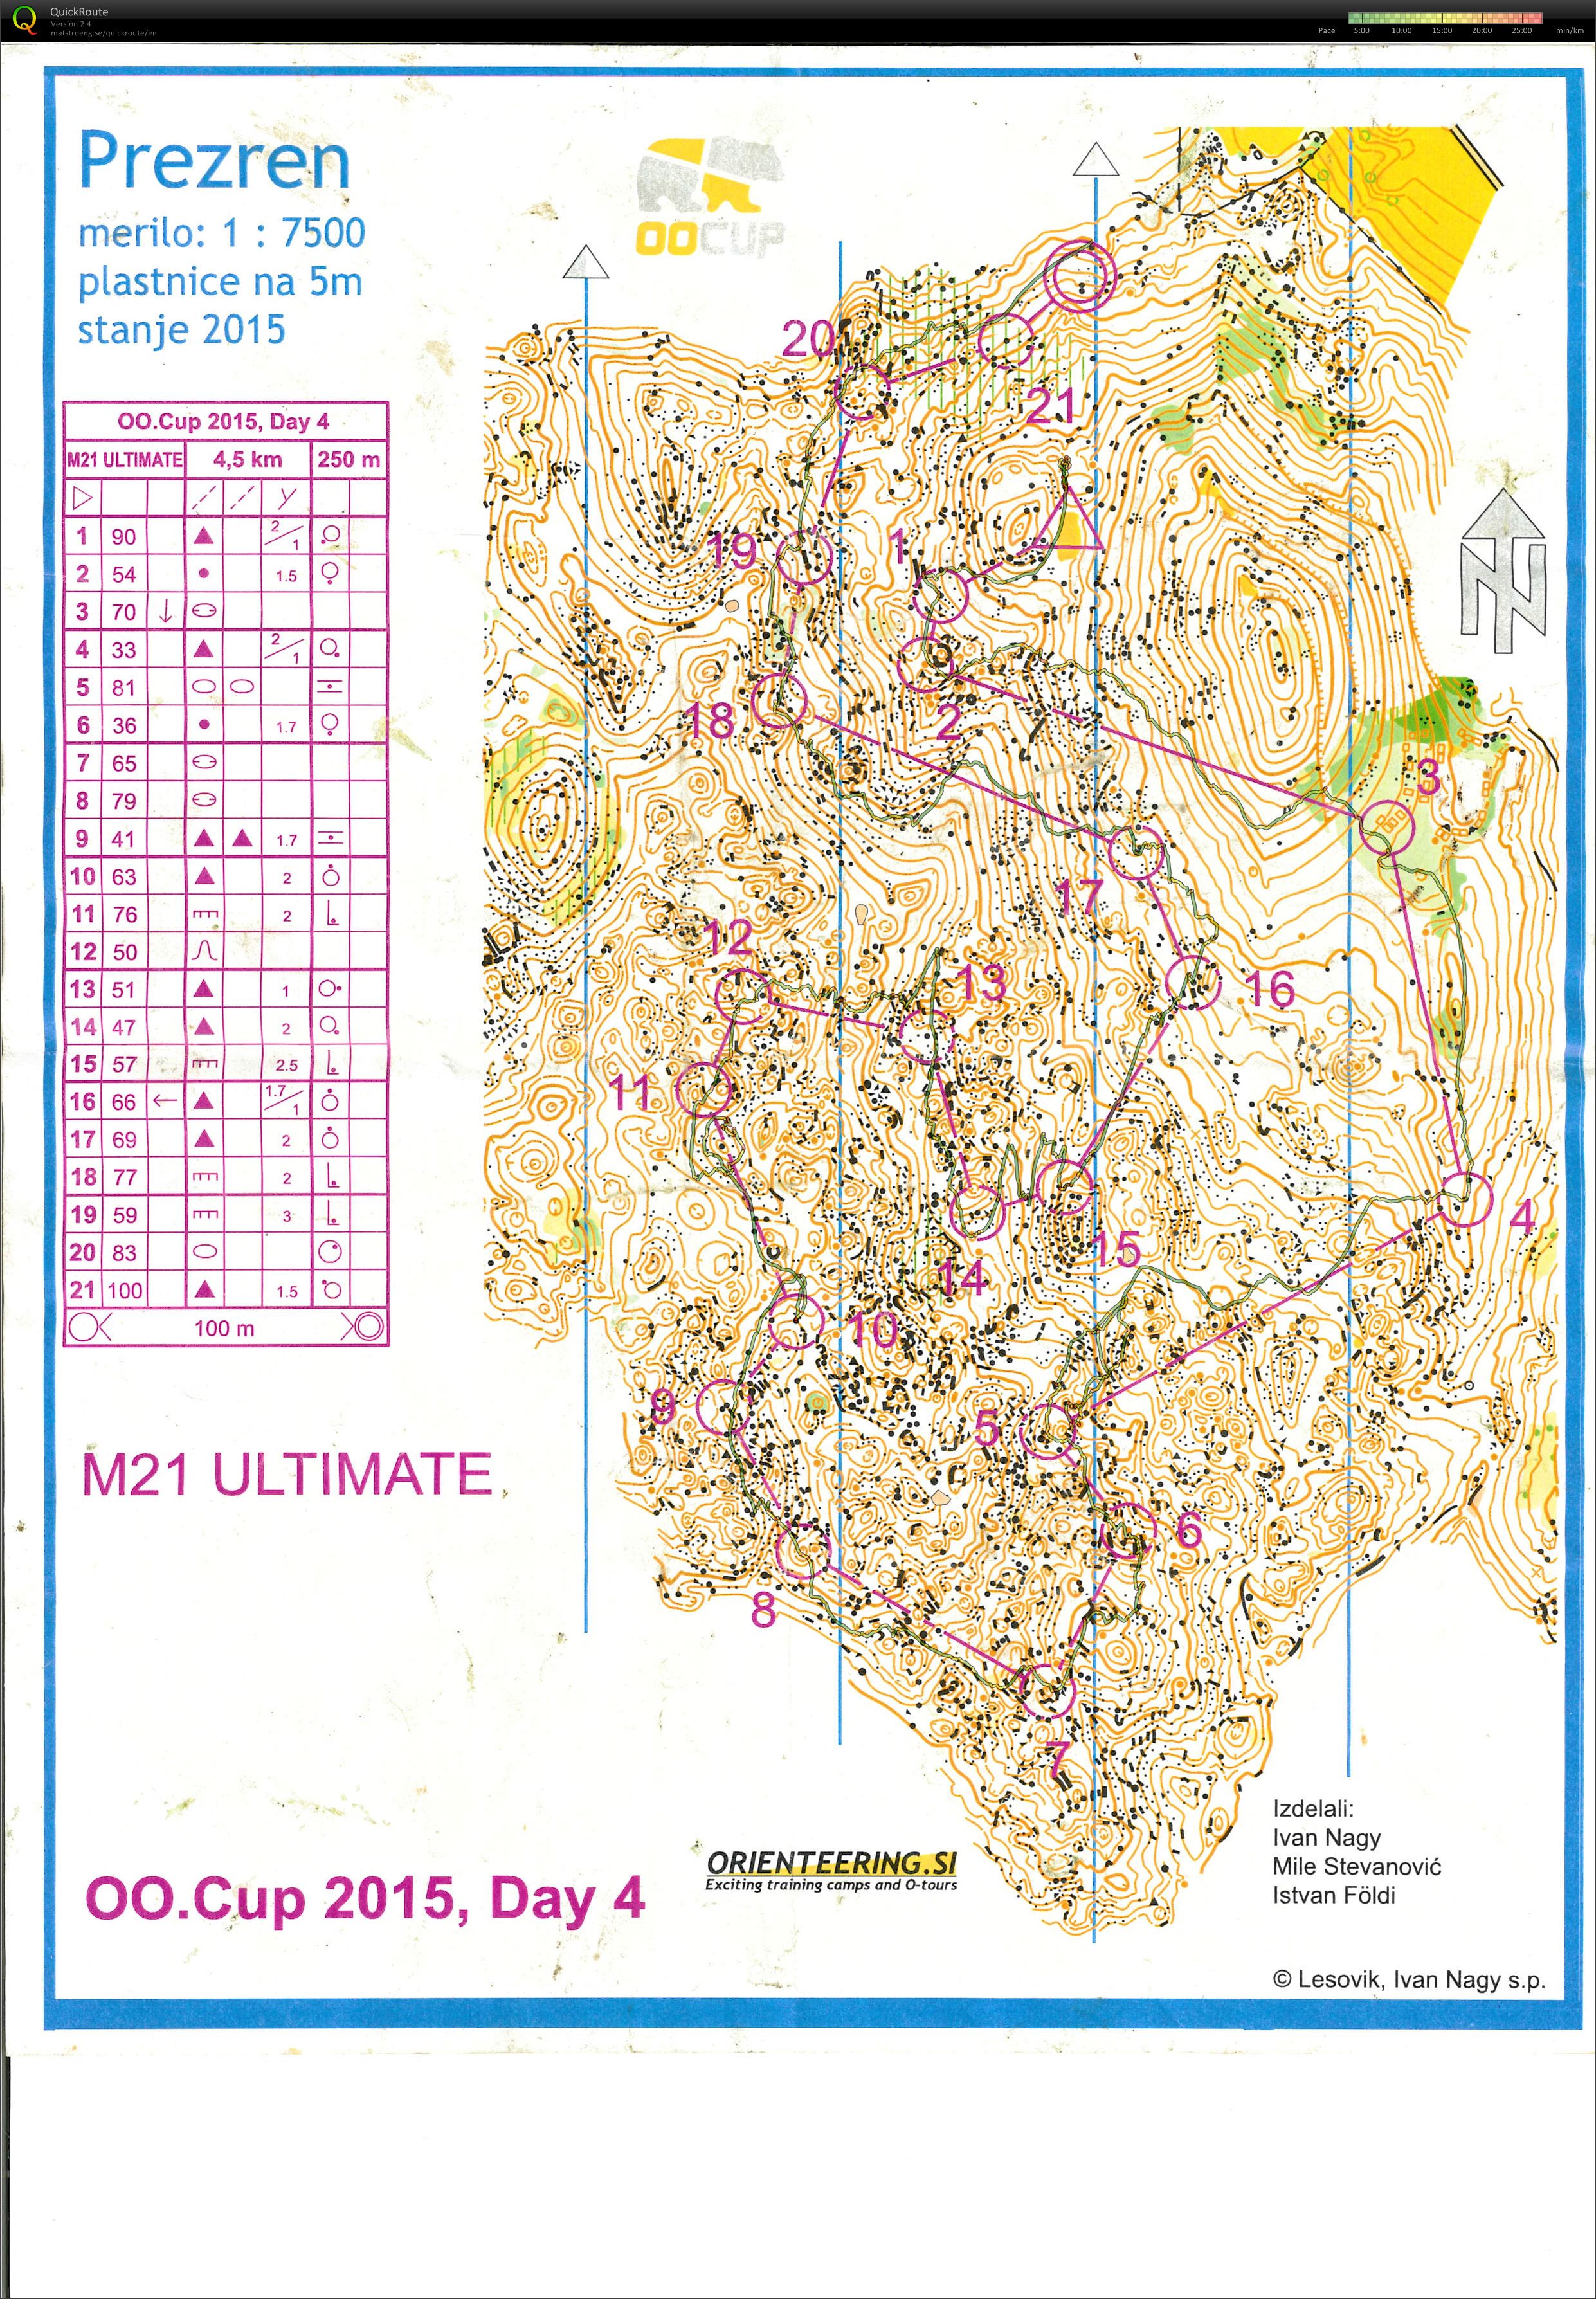 OOCup 2015 Stage 4 (28.07.2015)